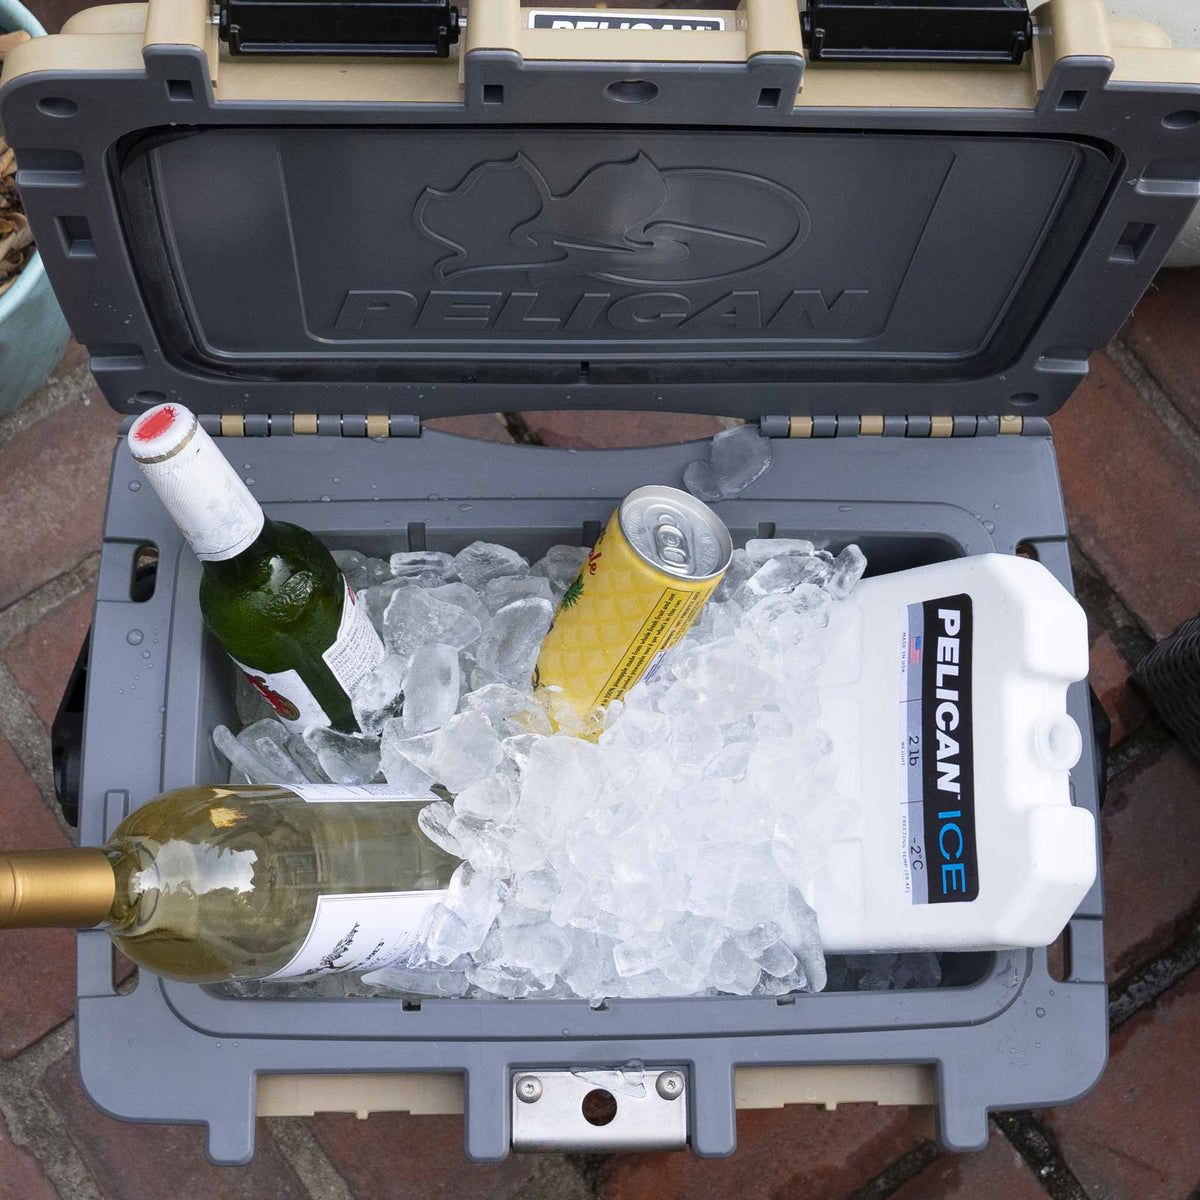 20QT Pelican Elite Cooler filled with ice, a 2lb Pelican Ice pack and beverages 